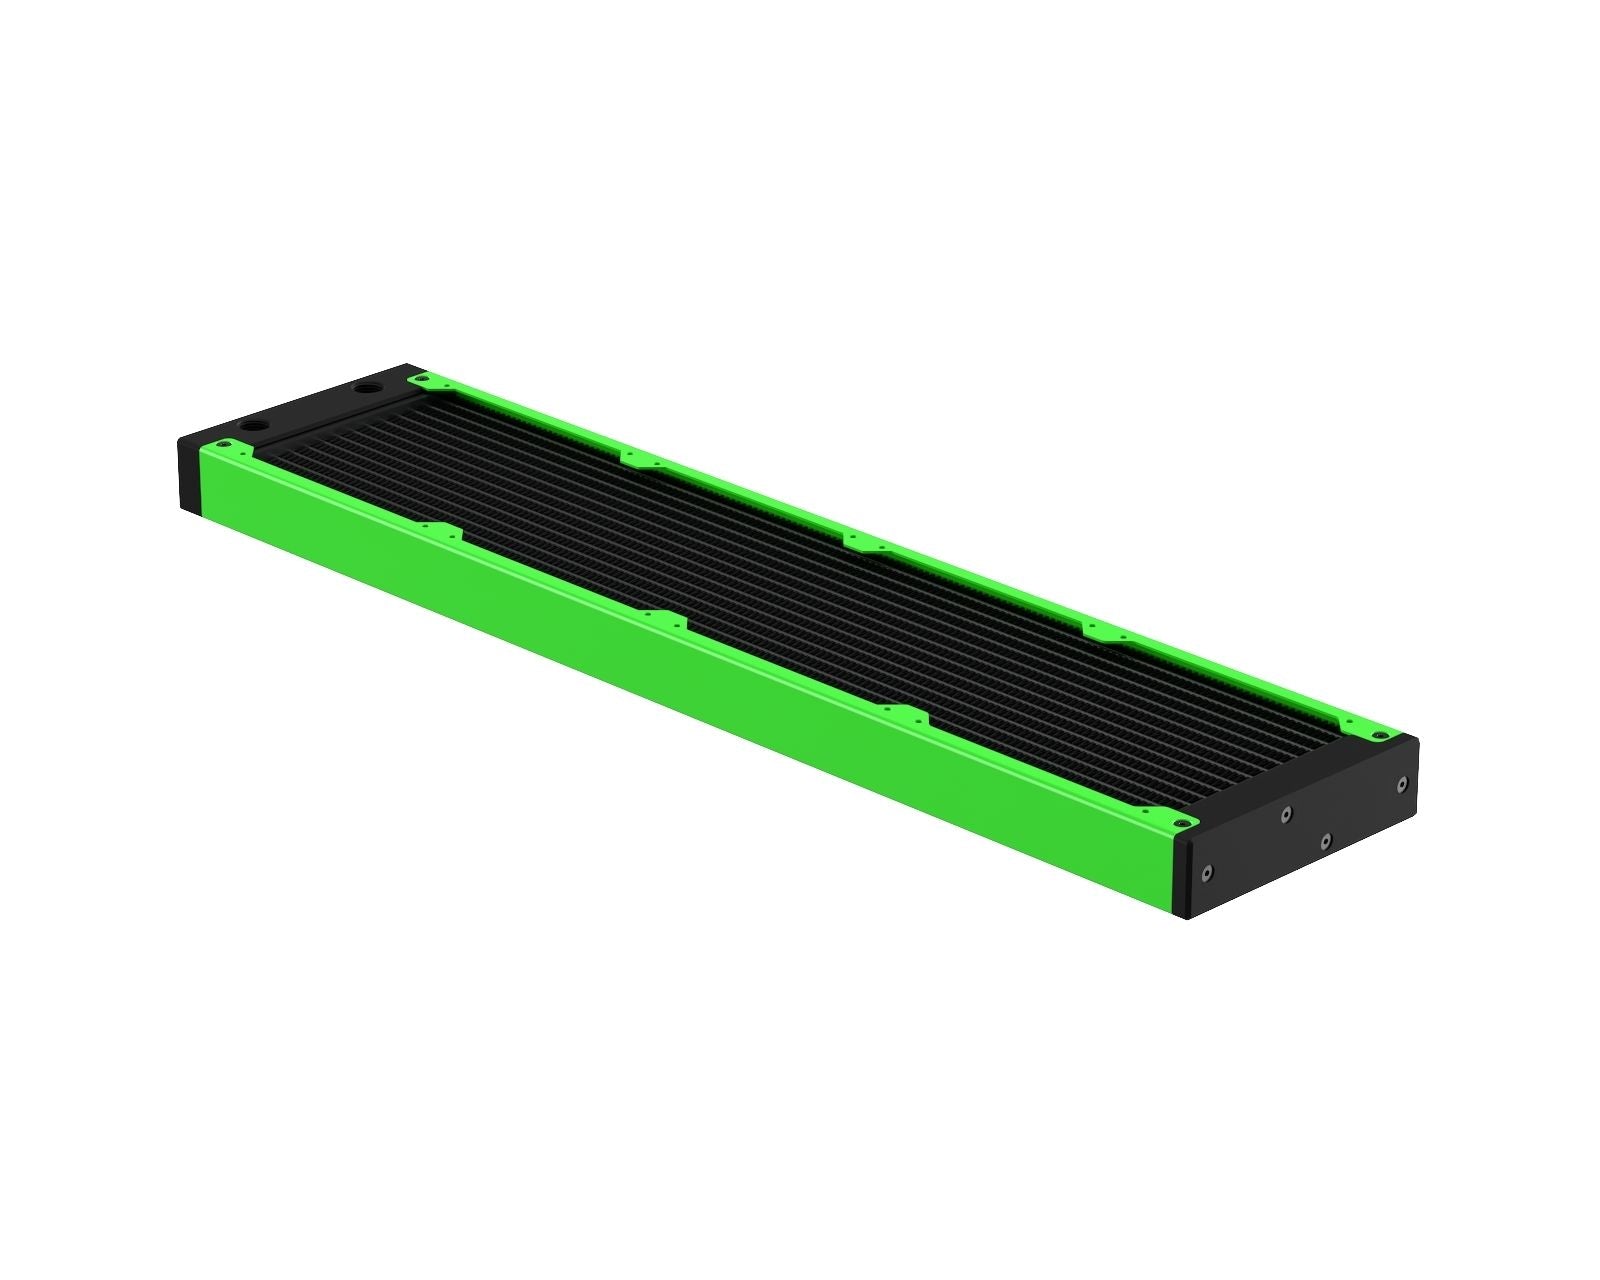 PrimoChill 480SL (30mm) EXIMO Modular Radiator, Black POM, 4x120mm, Quad Fan (R-SL-BK48) Available in 20+ Colors, Assembled in USA and Custom Watercooling Loop Ready - UV Green